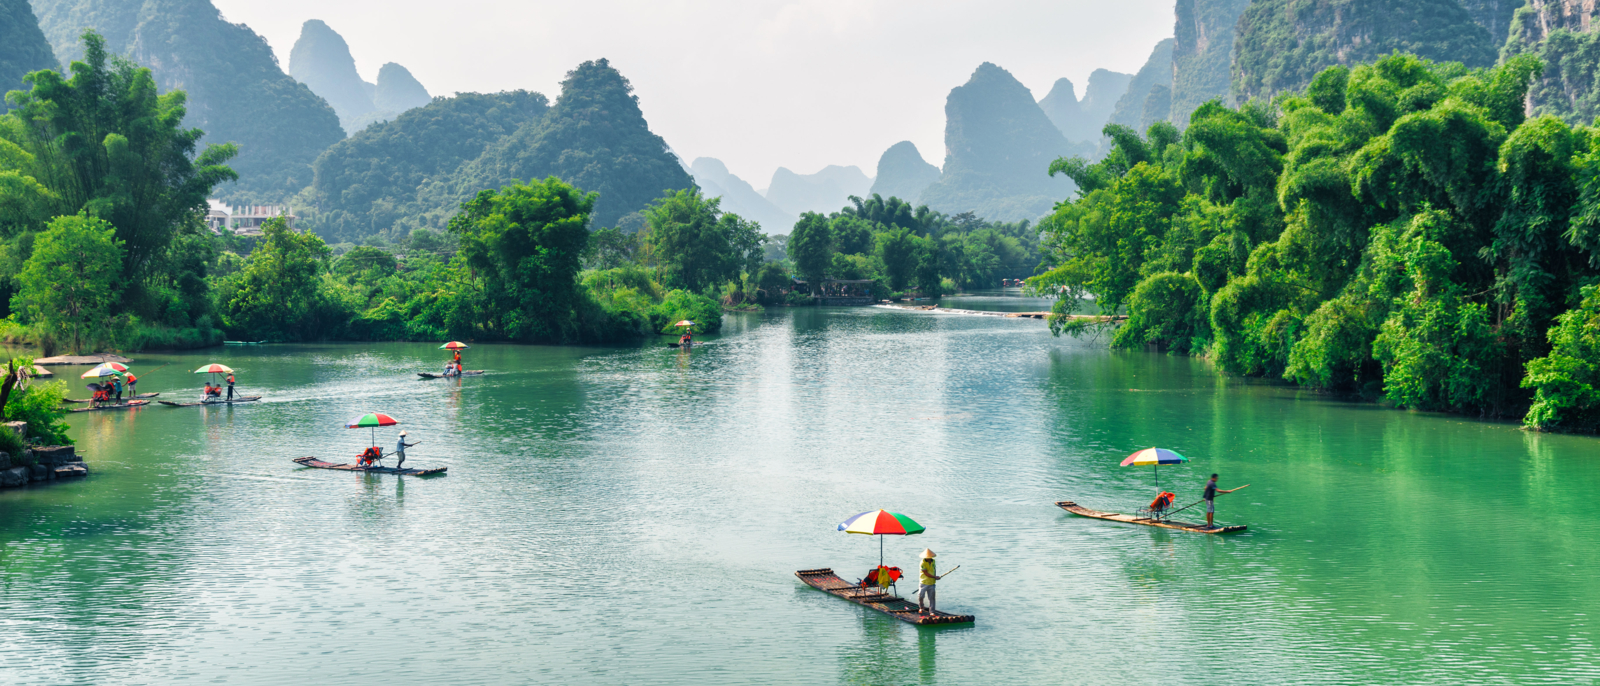 Scenic view of small tourist bamboo rafts sailing along the Yulong River among green woods and karst mountains at Yangshuo County of Guilin, China